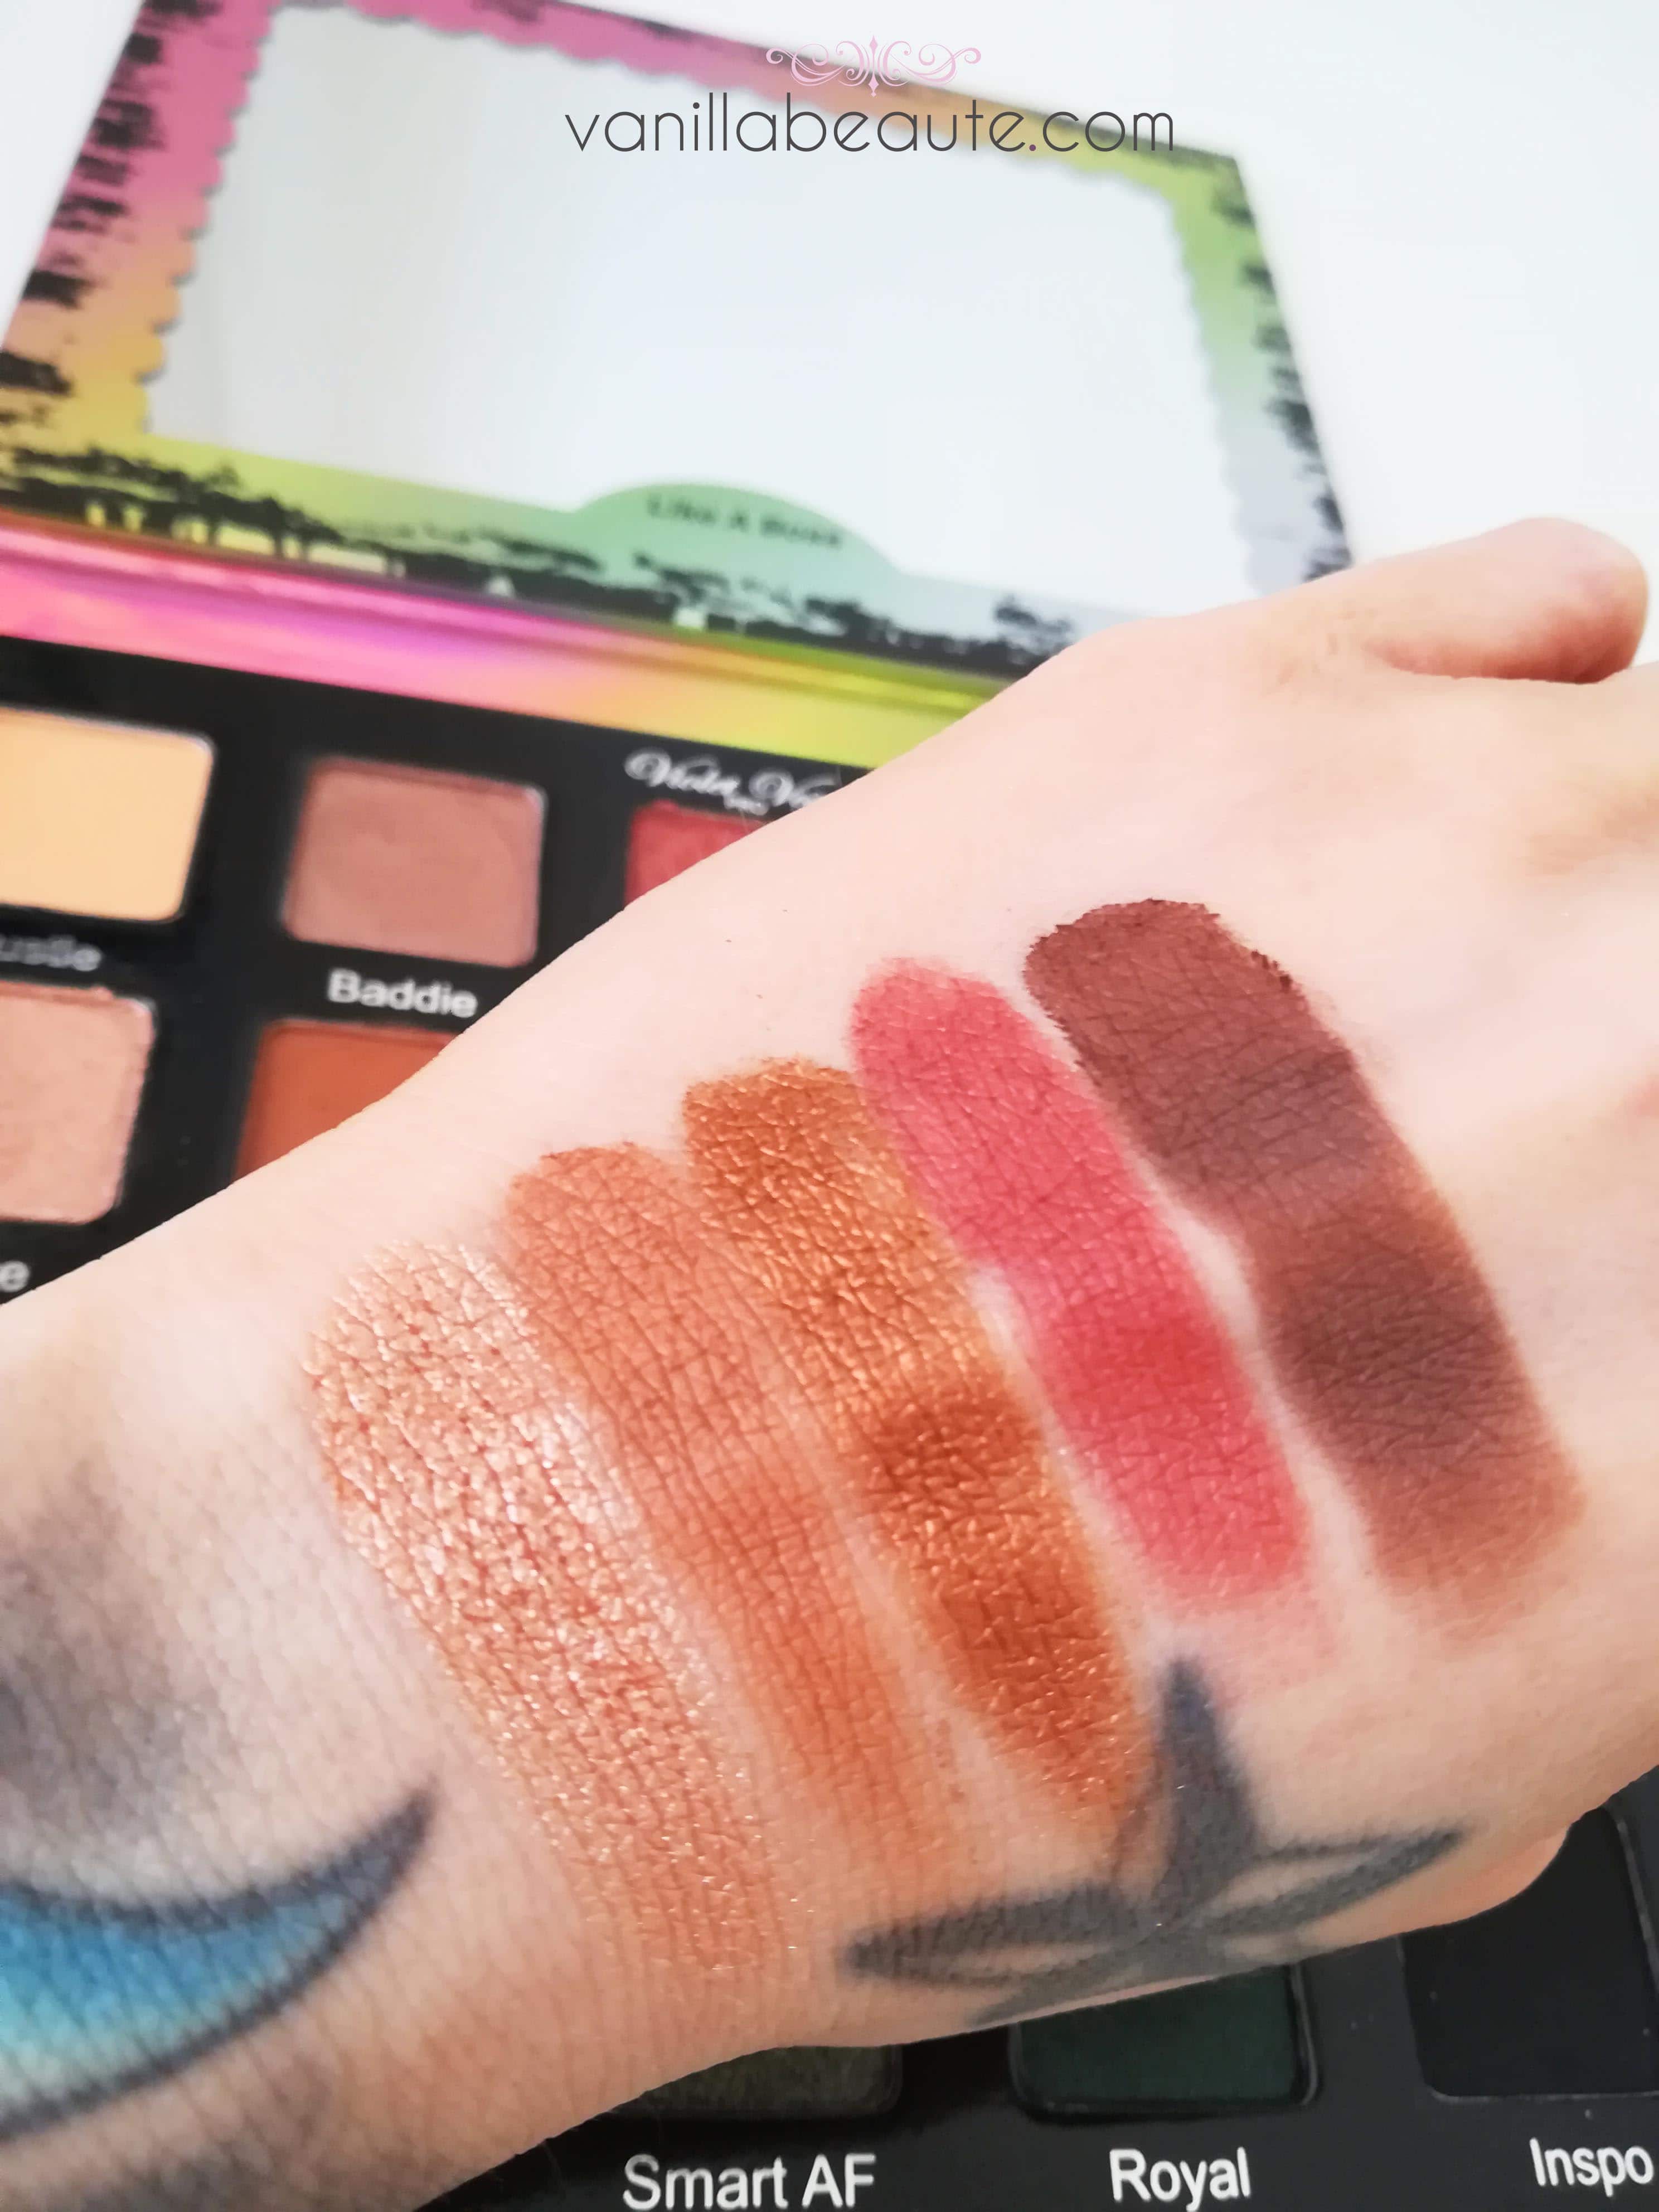 swatches Violet Voss Like a boss